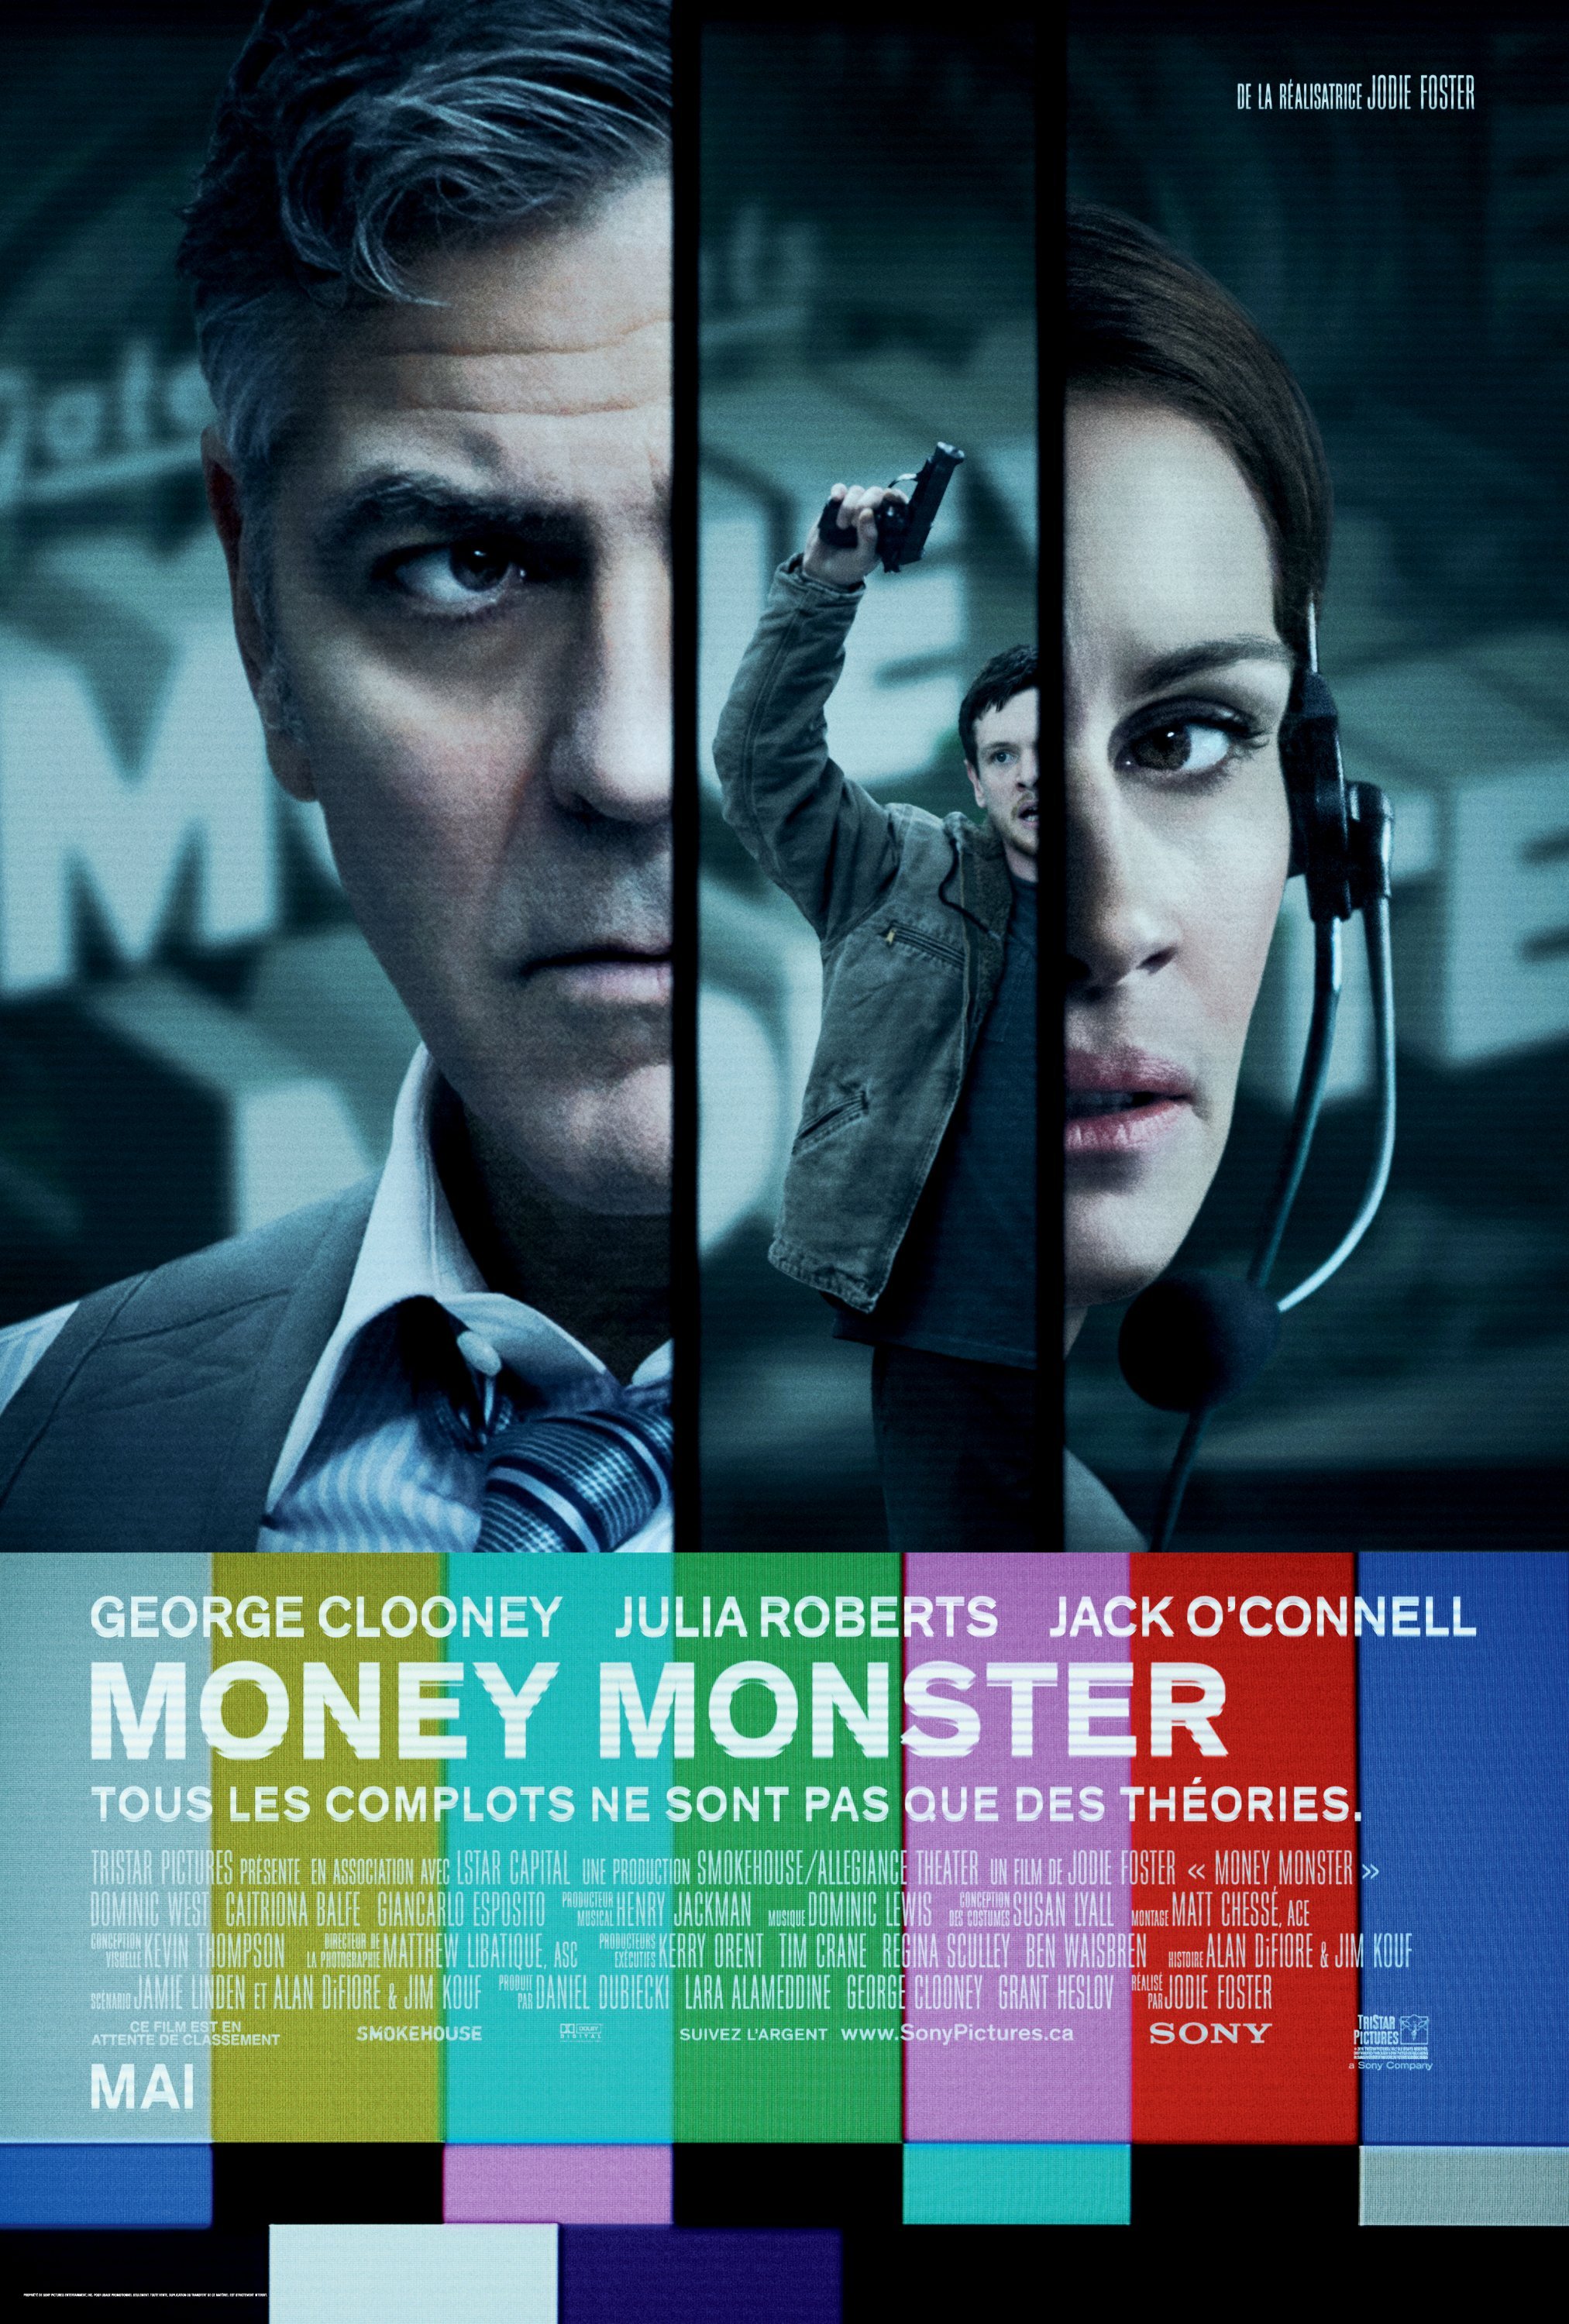 Poster of the movie Money Monster